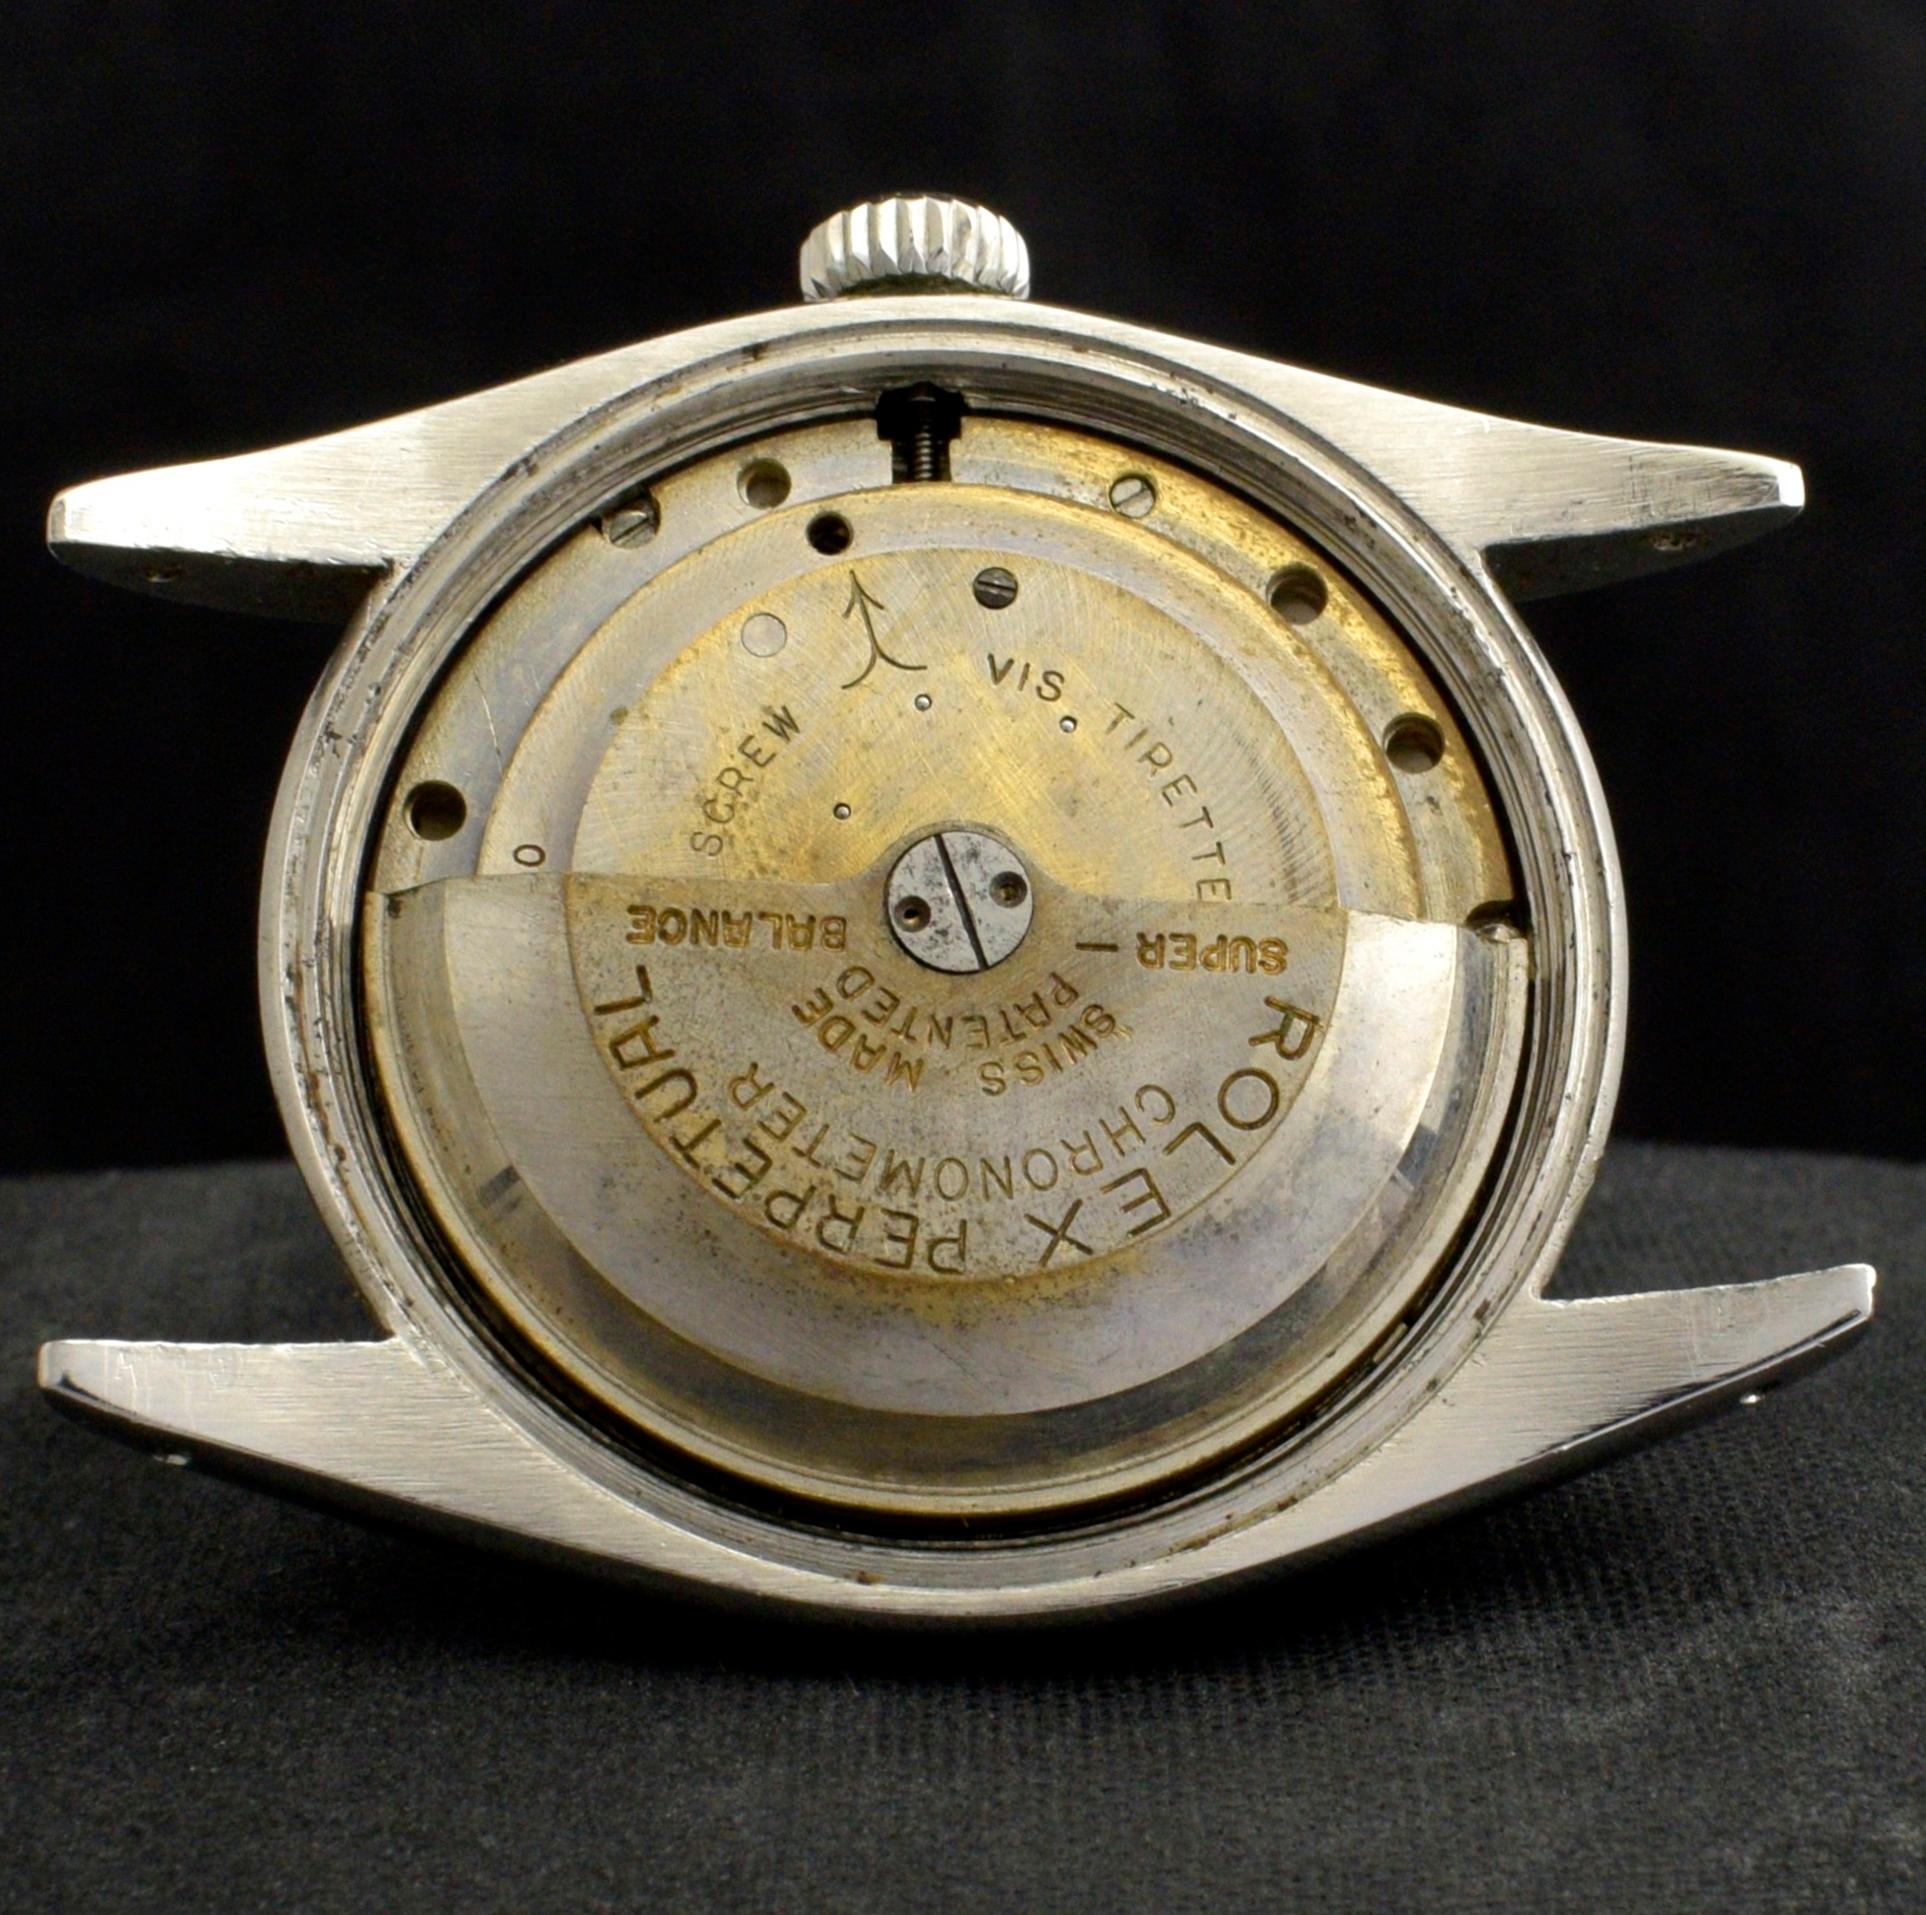 Rolex Oyster Perpetual Precision Big Bubbleback 6028 Steel Automatic Watch, 1952 For Sale 3